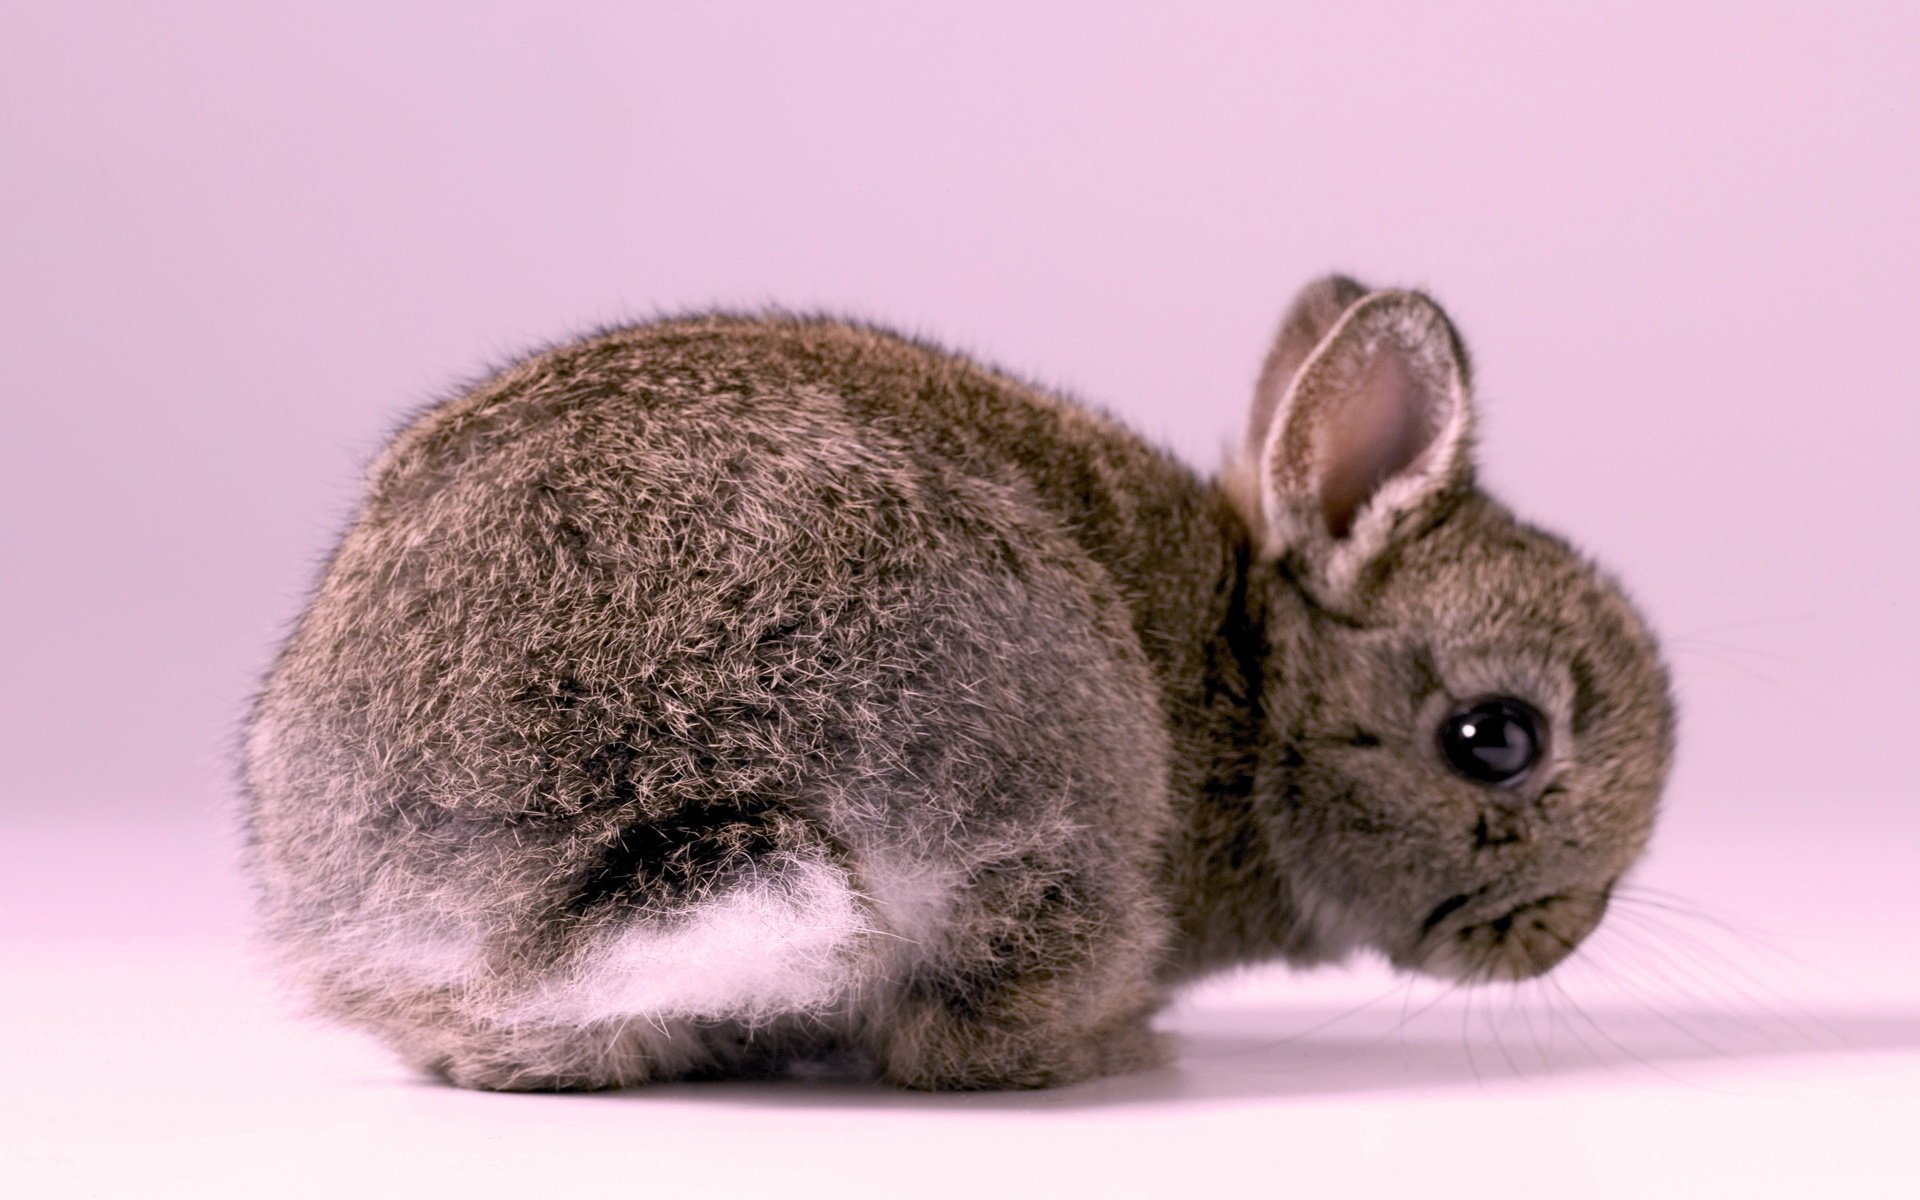 Rabbit on a pink background